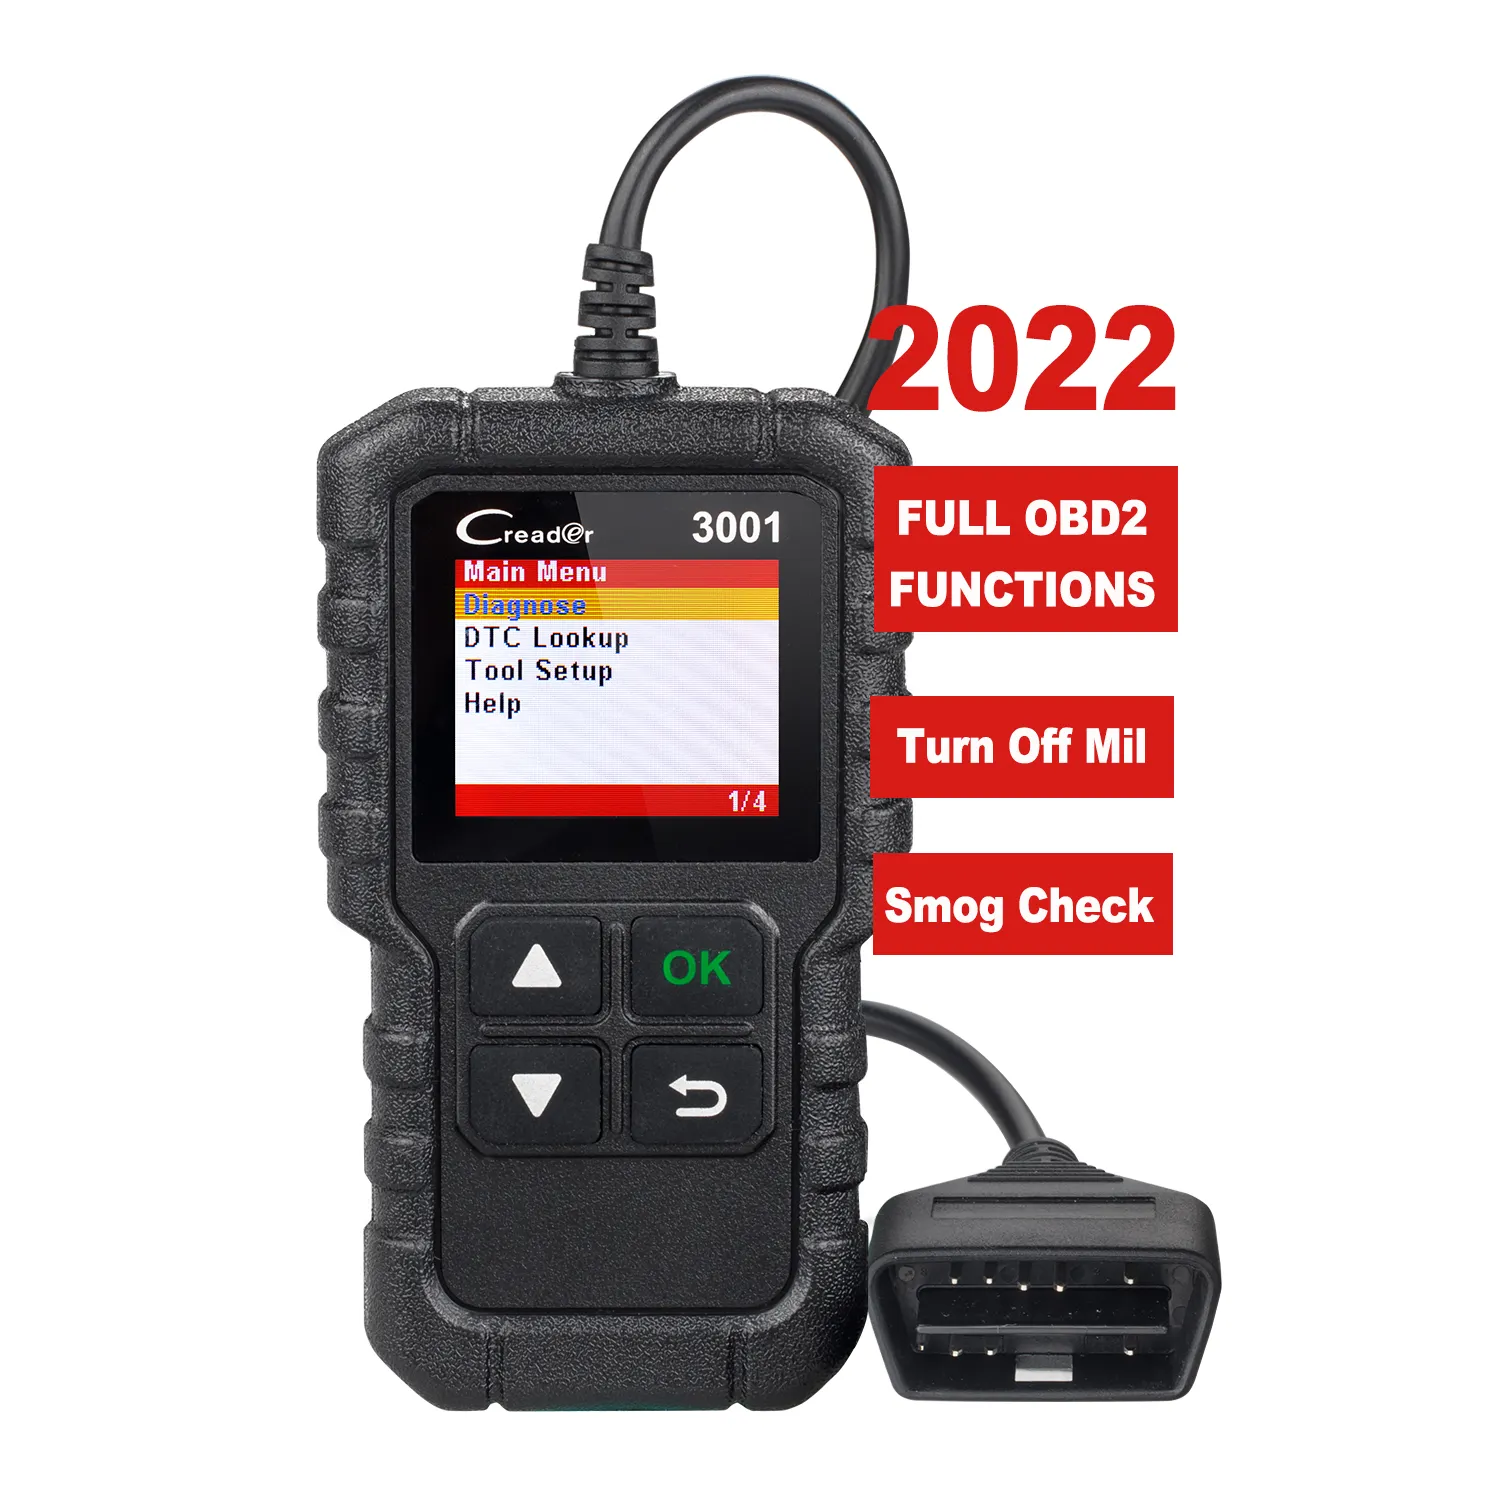 Best Selling Product Amazon Launch CR3001 Obd2 Scanner Diagnostic Tool Car Machine Check Engine Professional Code Reader